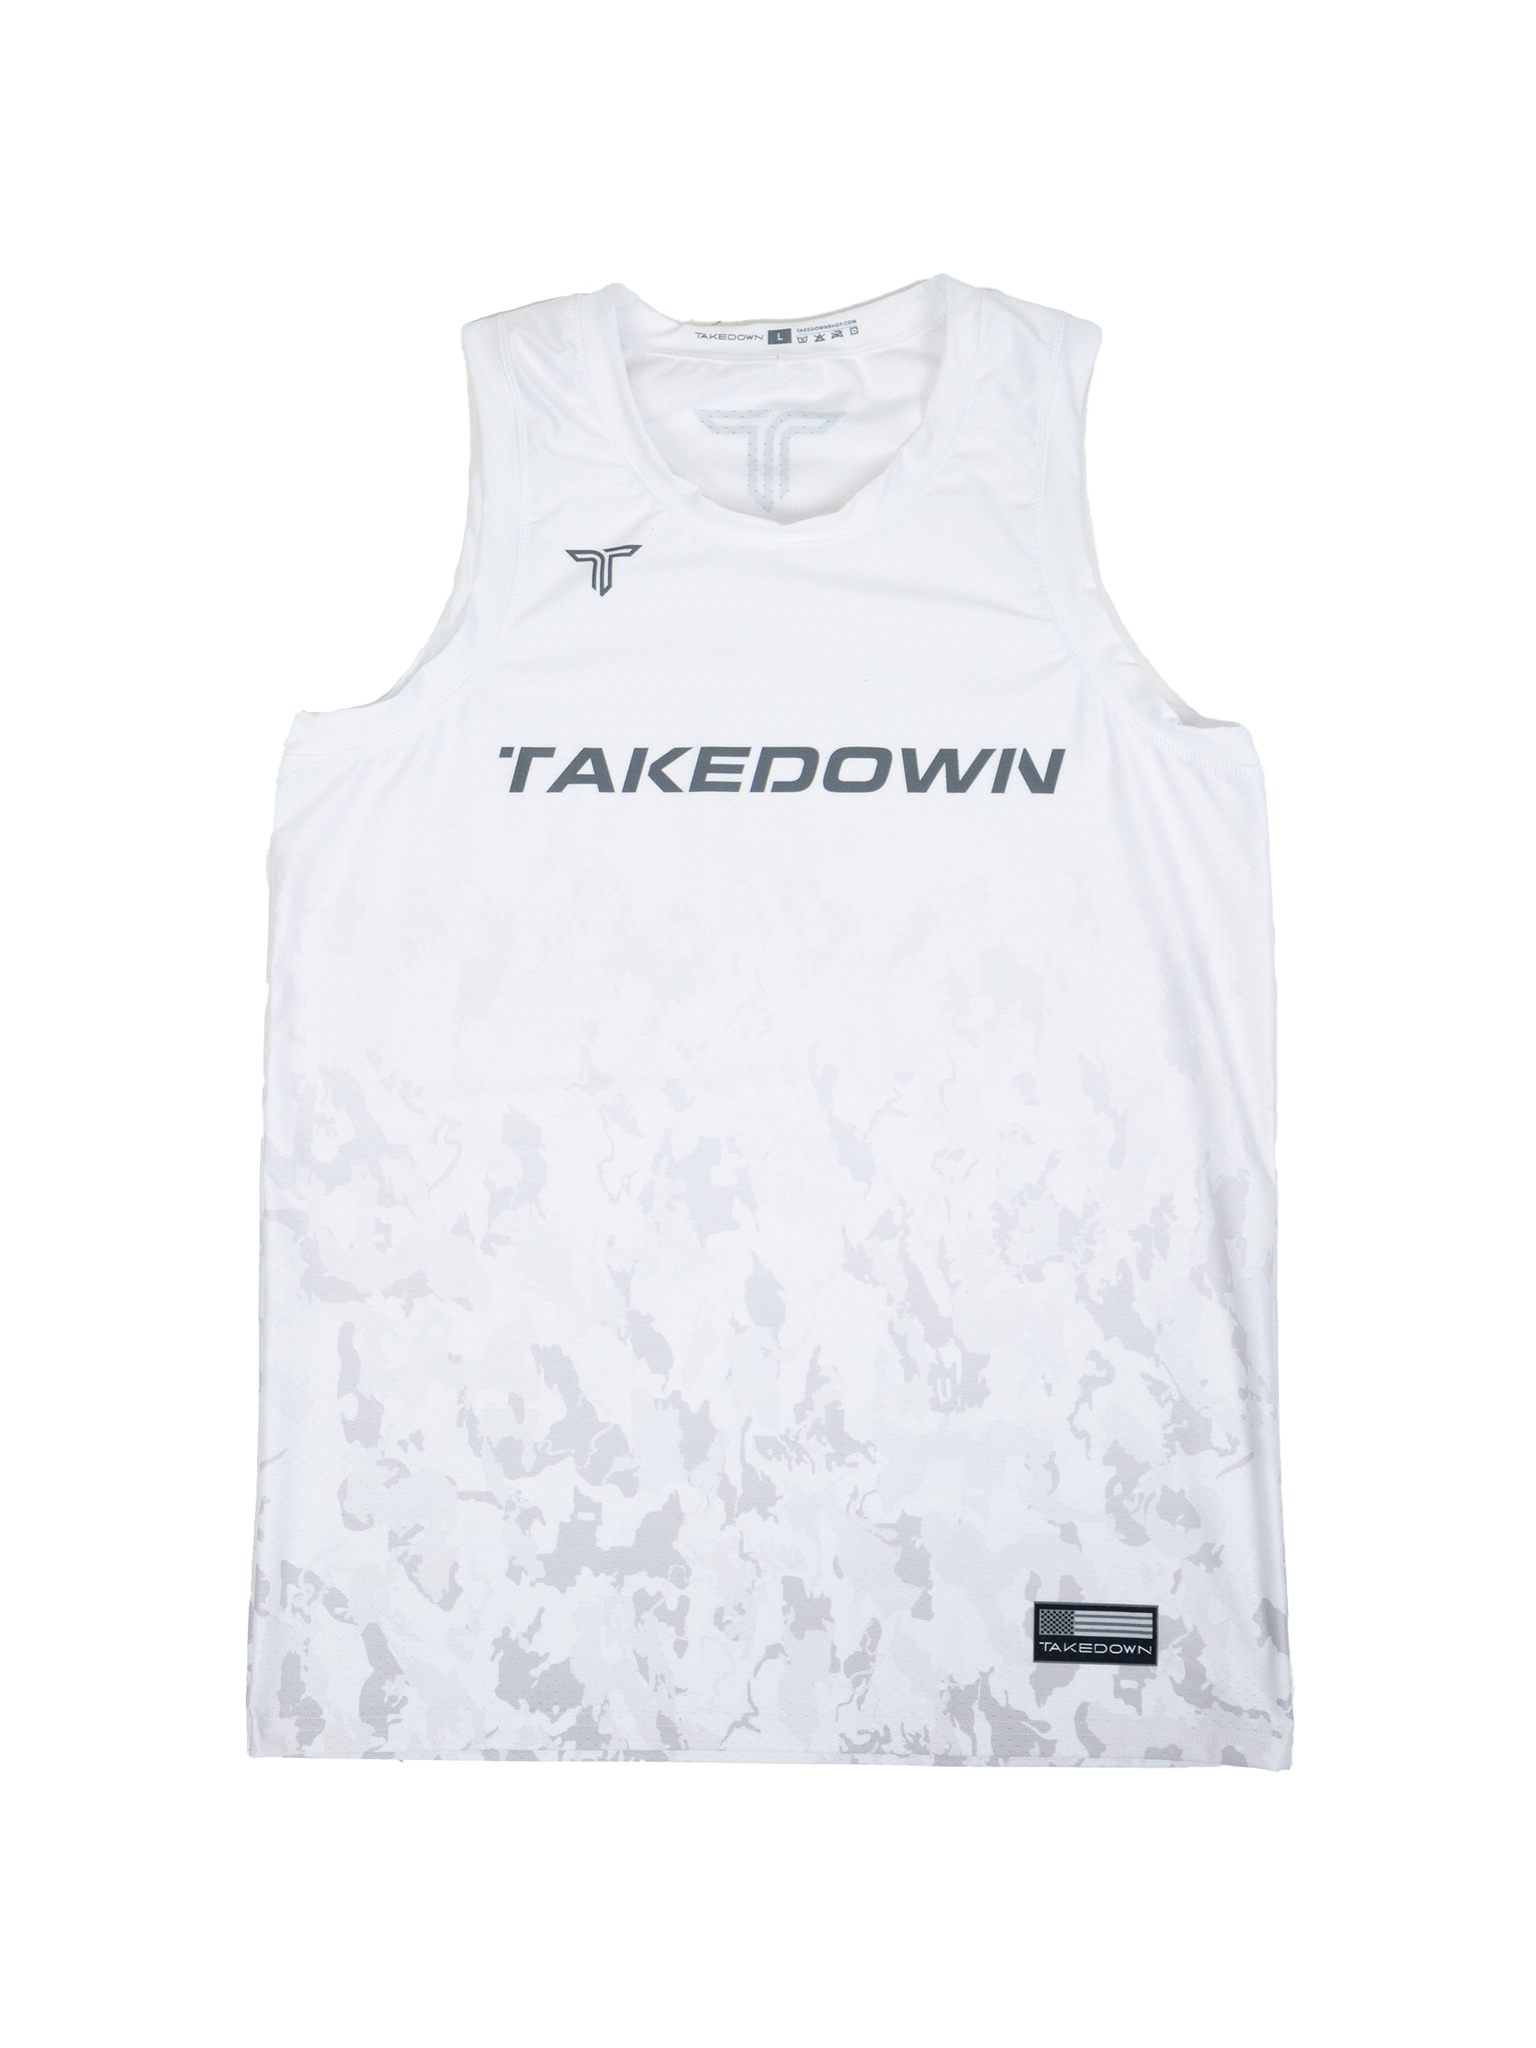 Particle Camo Sleeveless Jersey - Ghost Grey